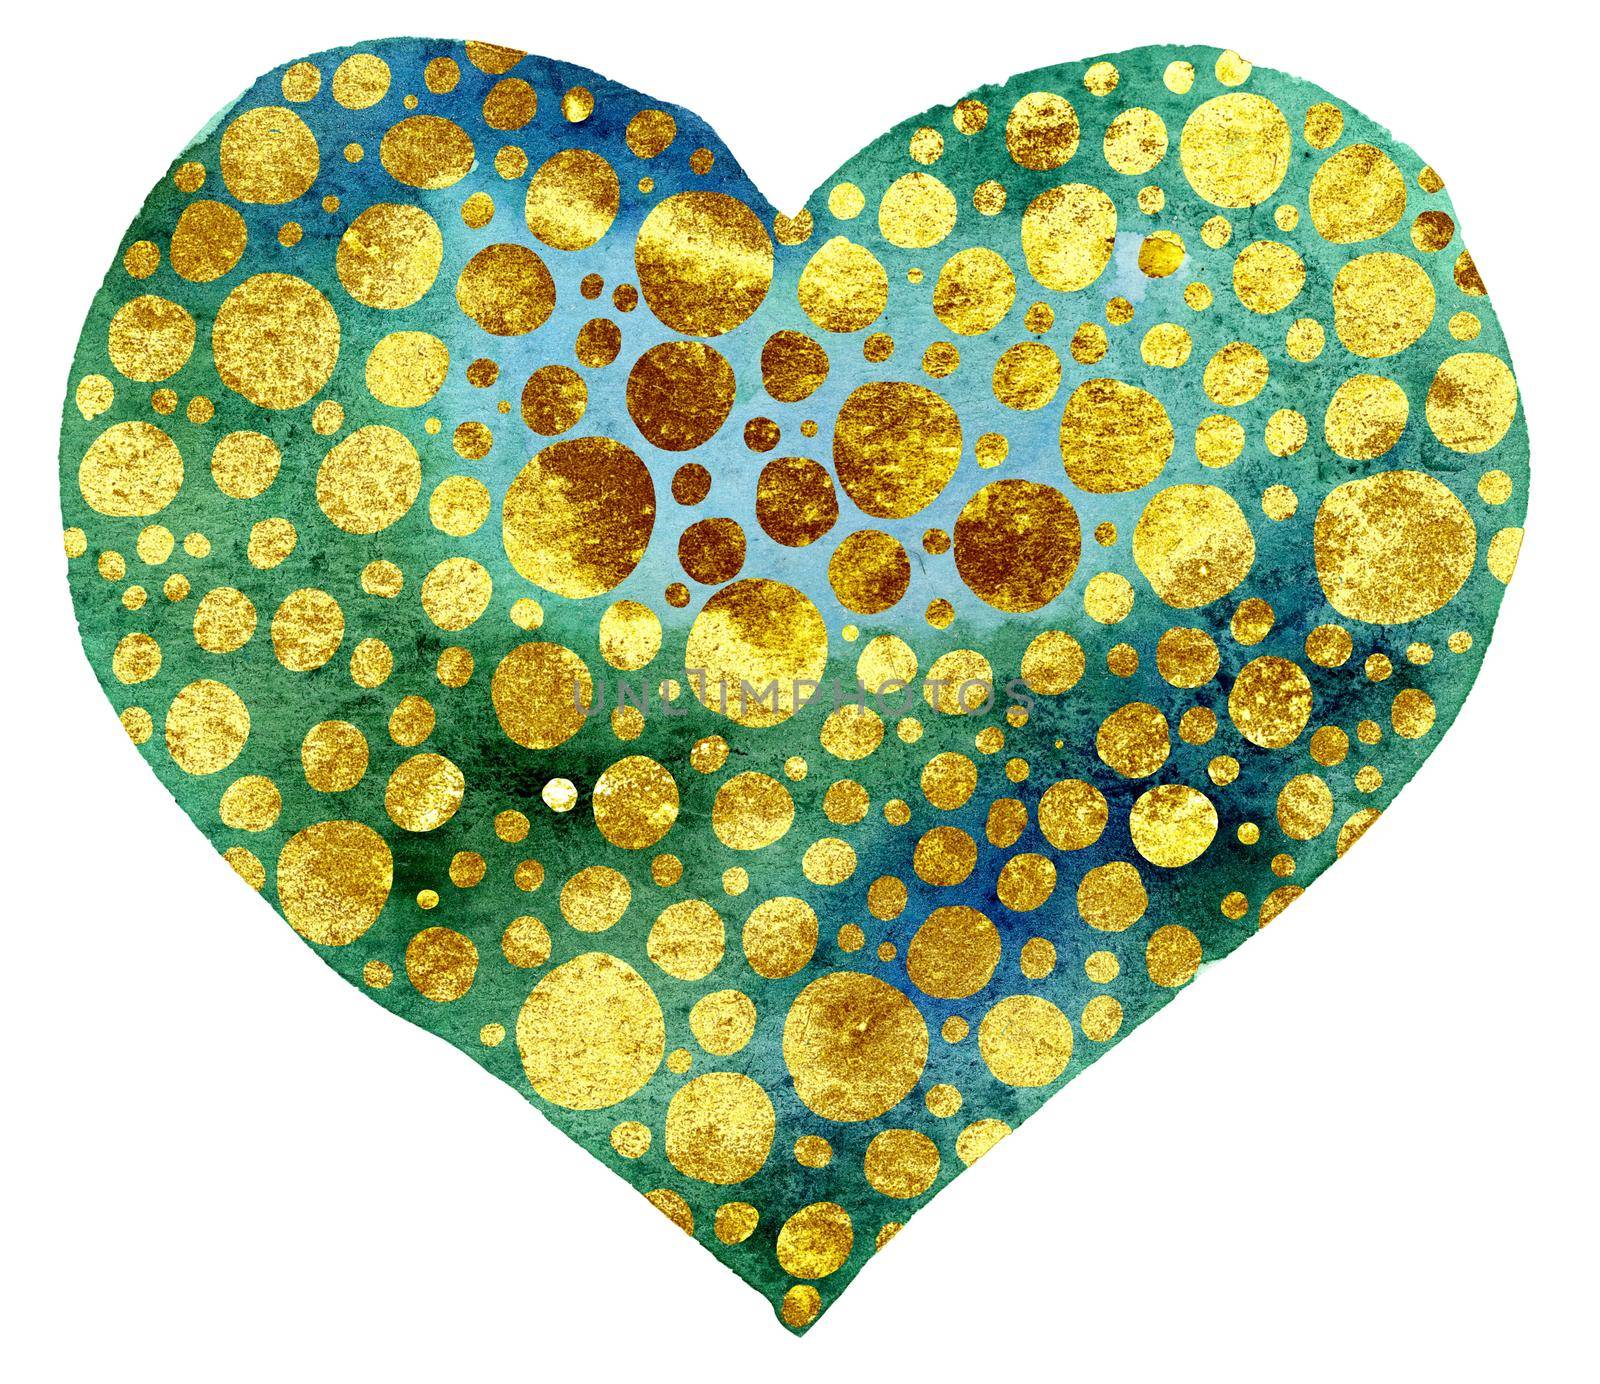 Watercolor dark green heart with gold dots by NataOmsk